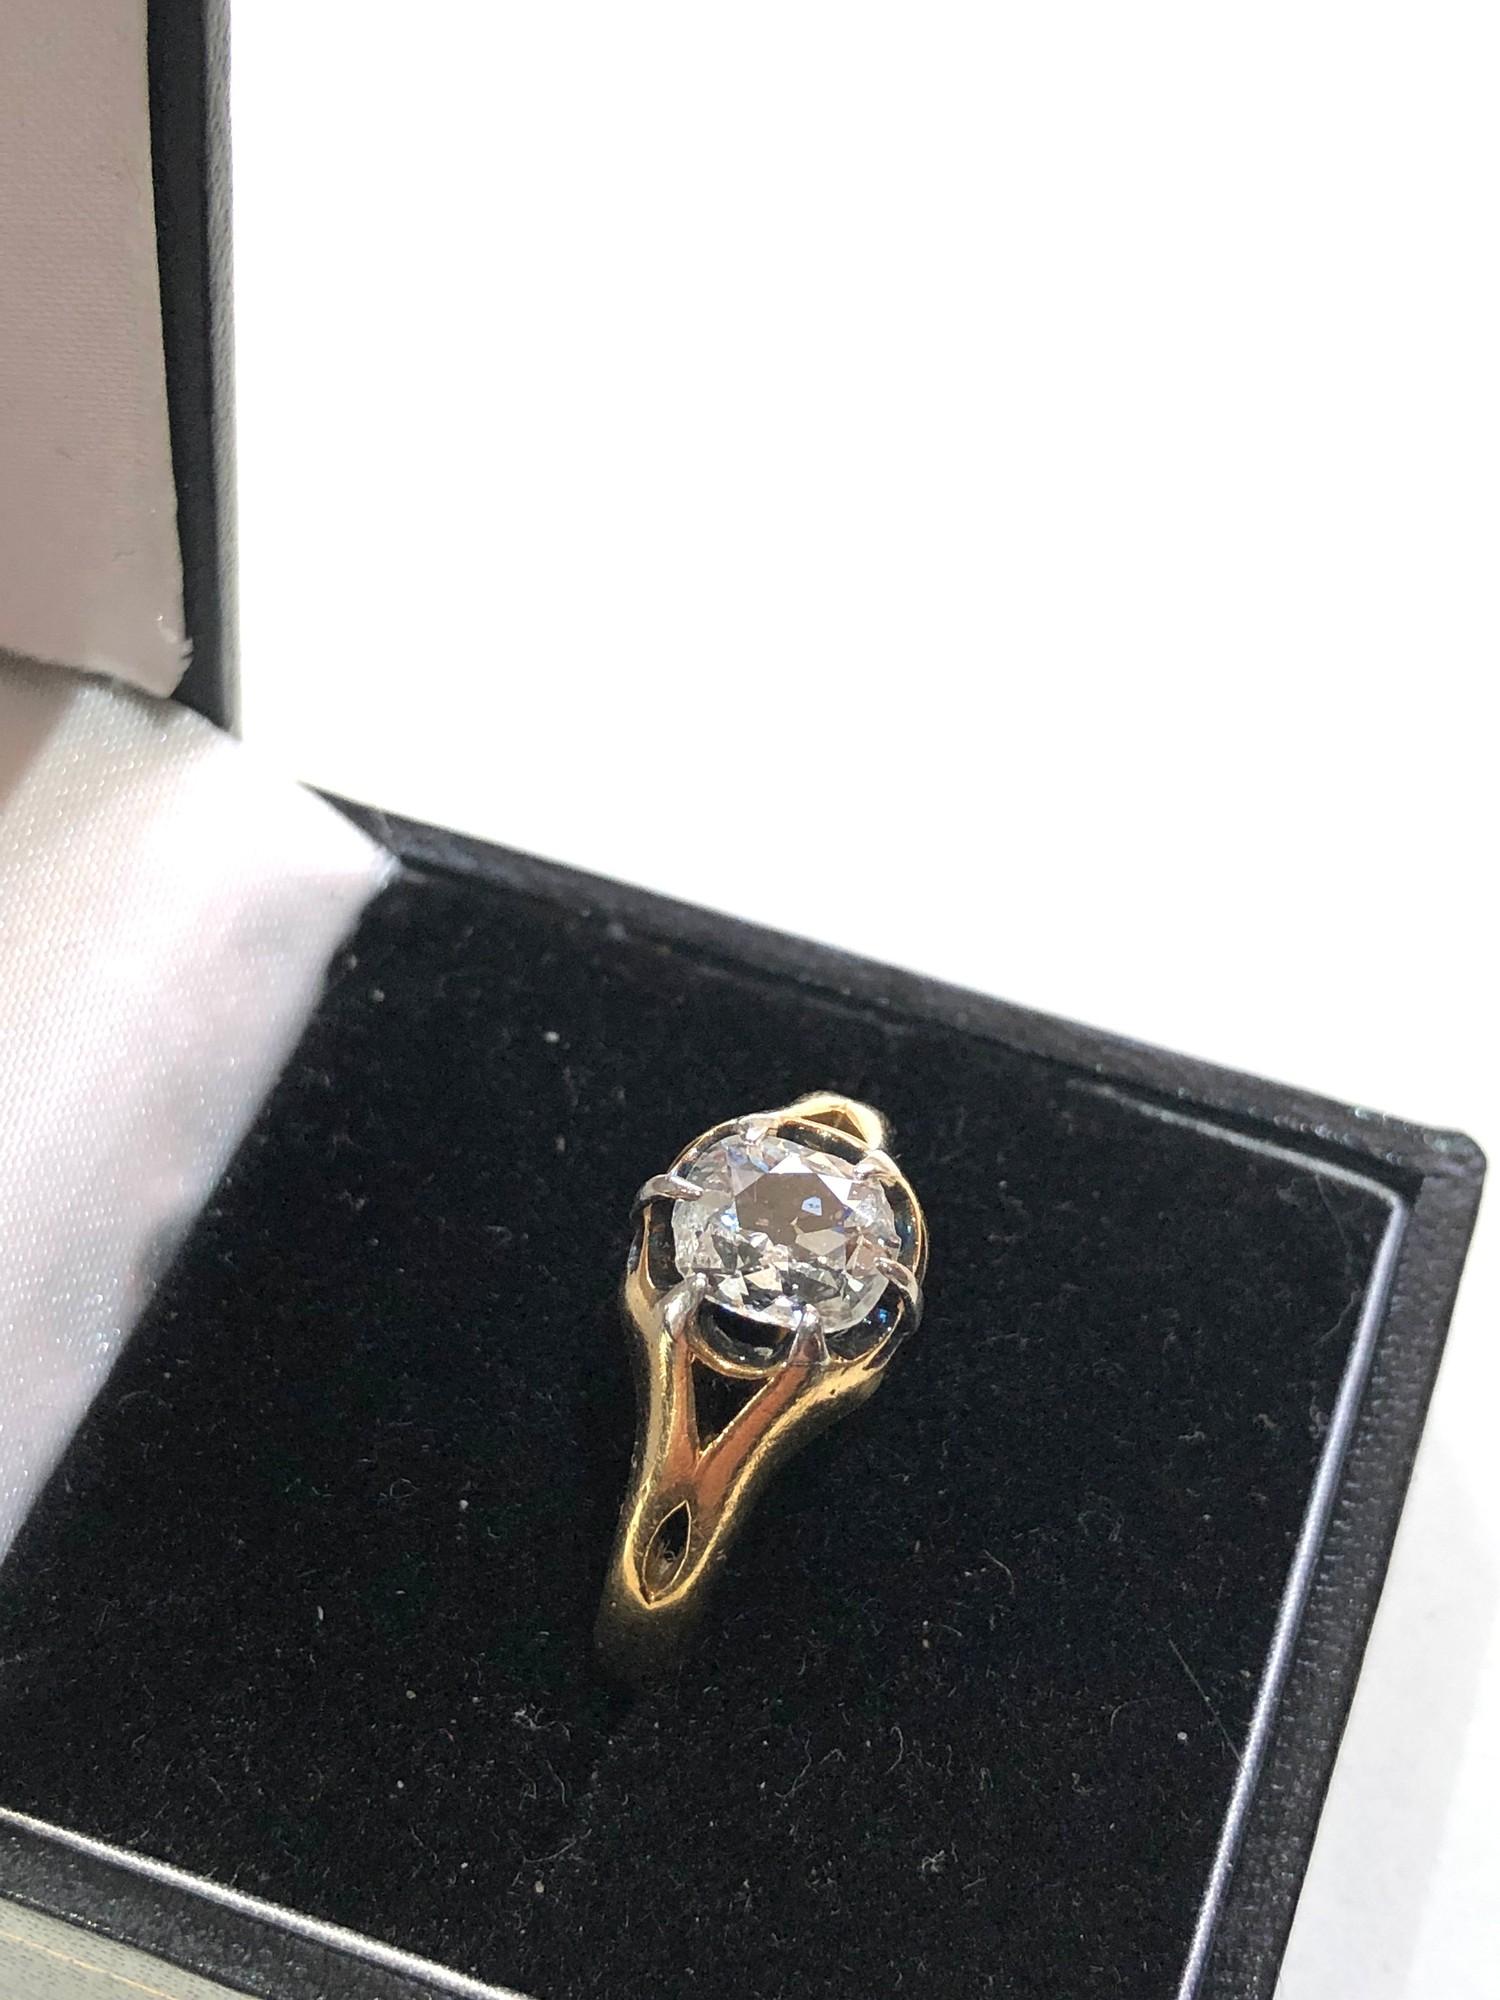 18ct gold antique old cut diamond solitaire ring weight 5.6g edge chips to diamond measures approx - Image 2 of 6